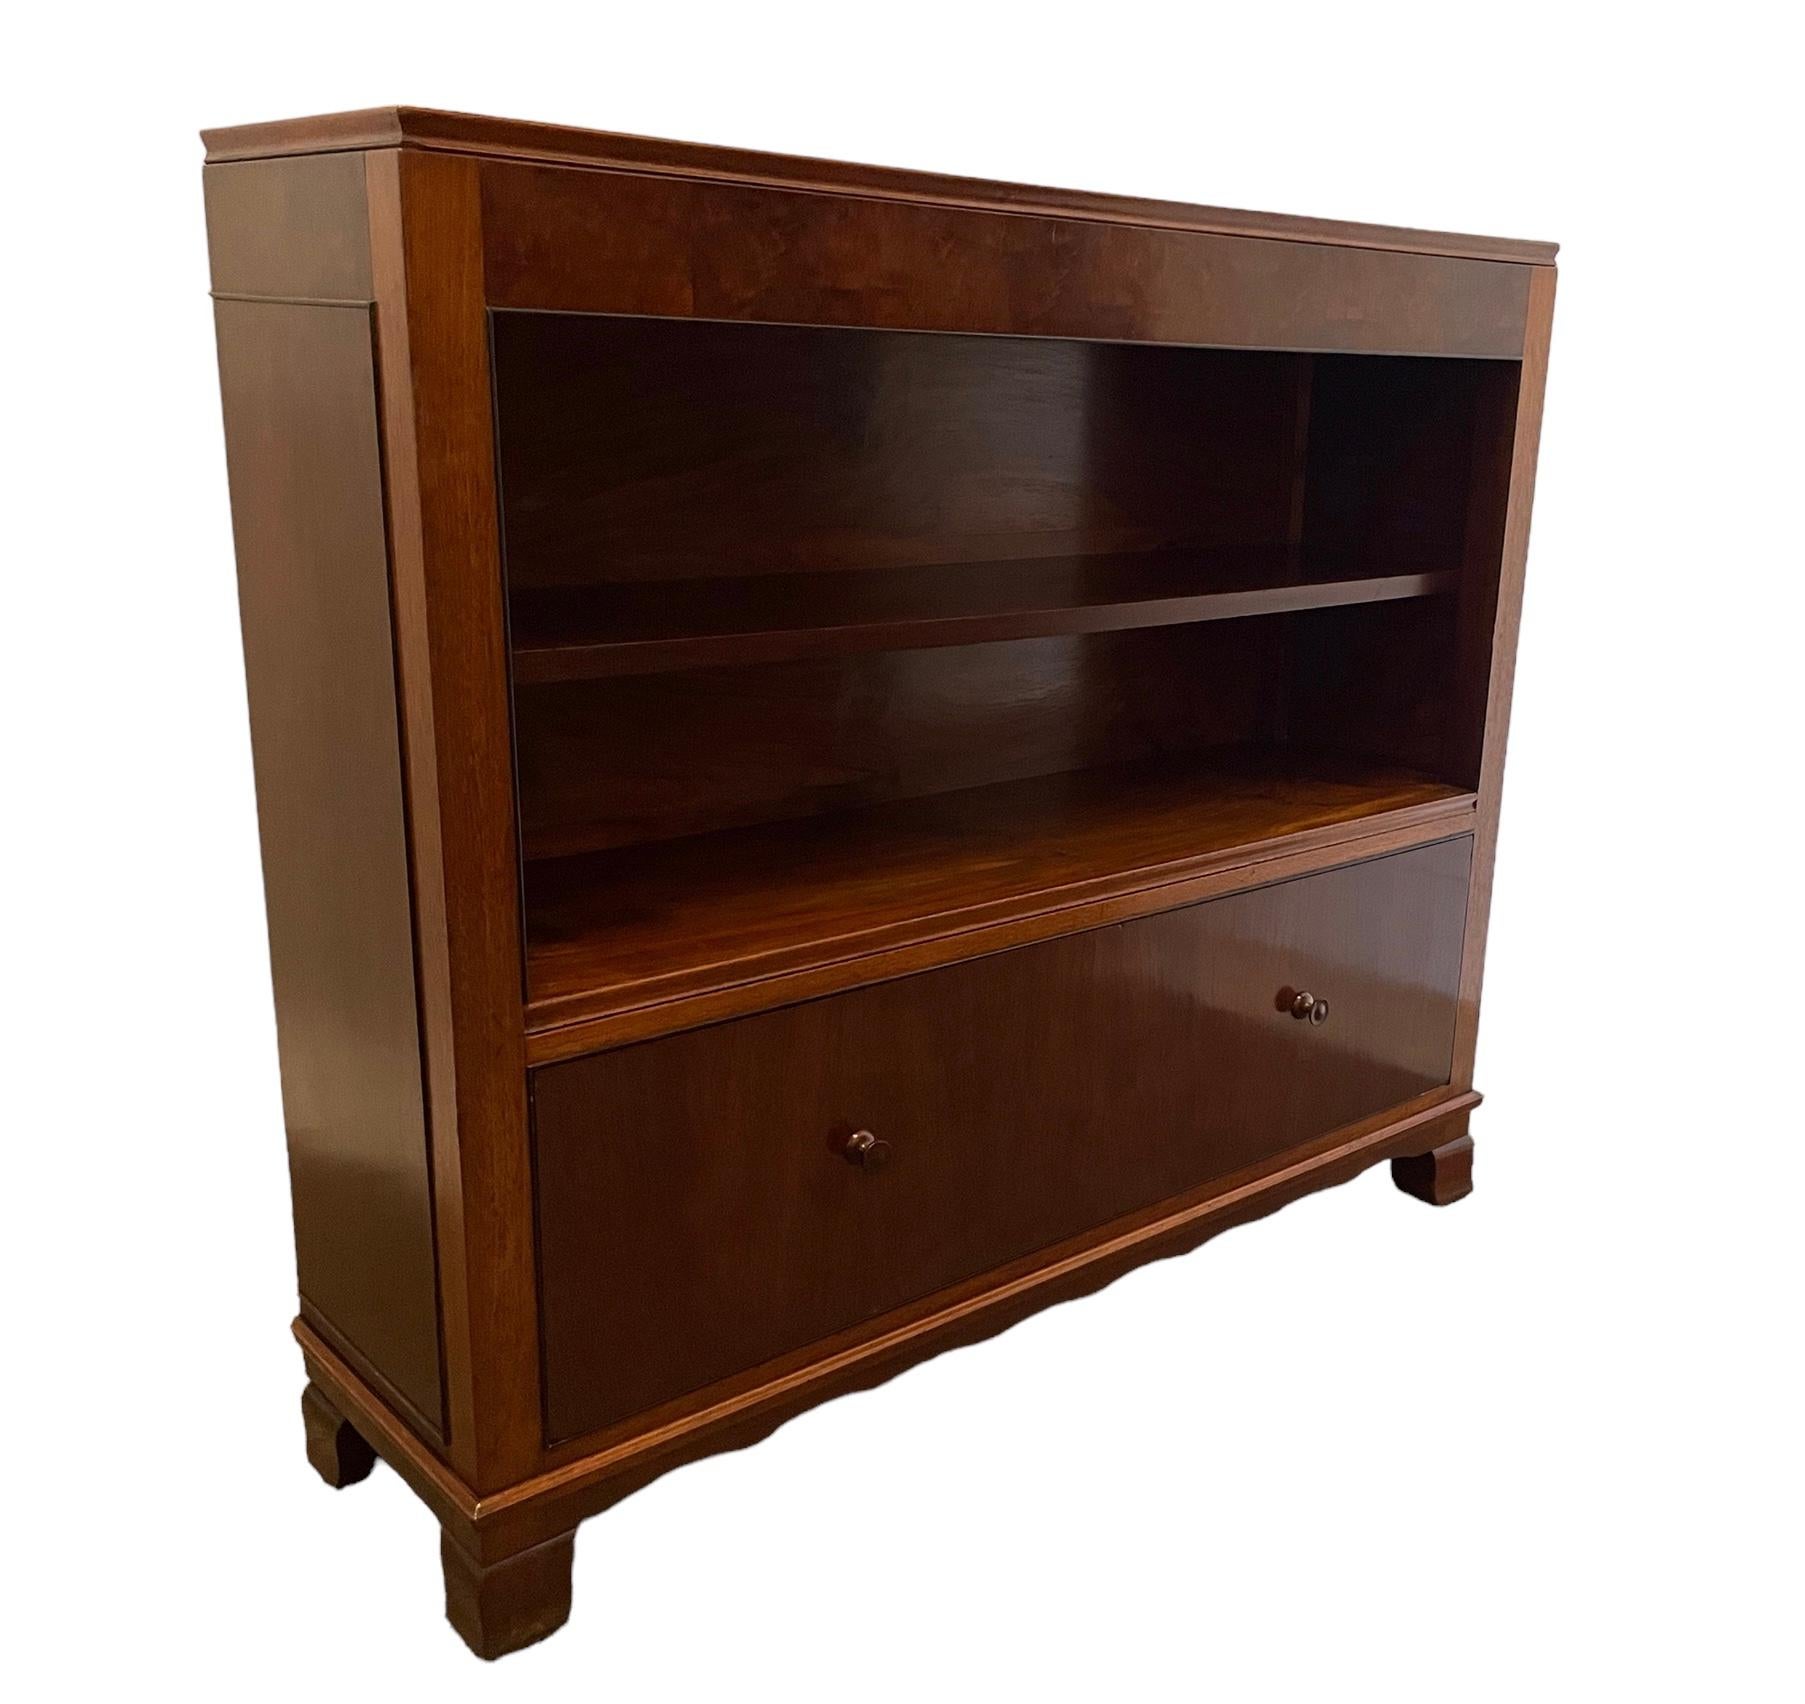 A quality Art walnut cabinet/bookcase by Maurice Adams. With two open shelves and a deep drawer below. Makers label to the back. A highly regarded company who designed and produced items for the upper class and aristocracy. 
This item features on